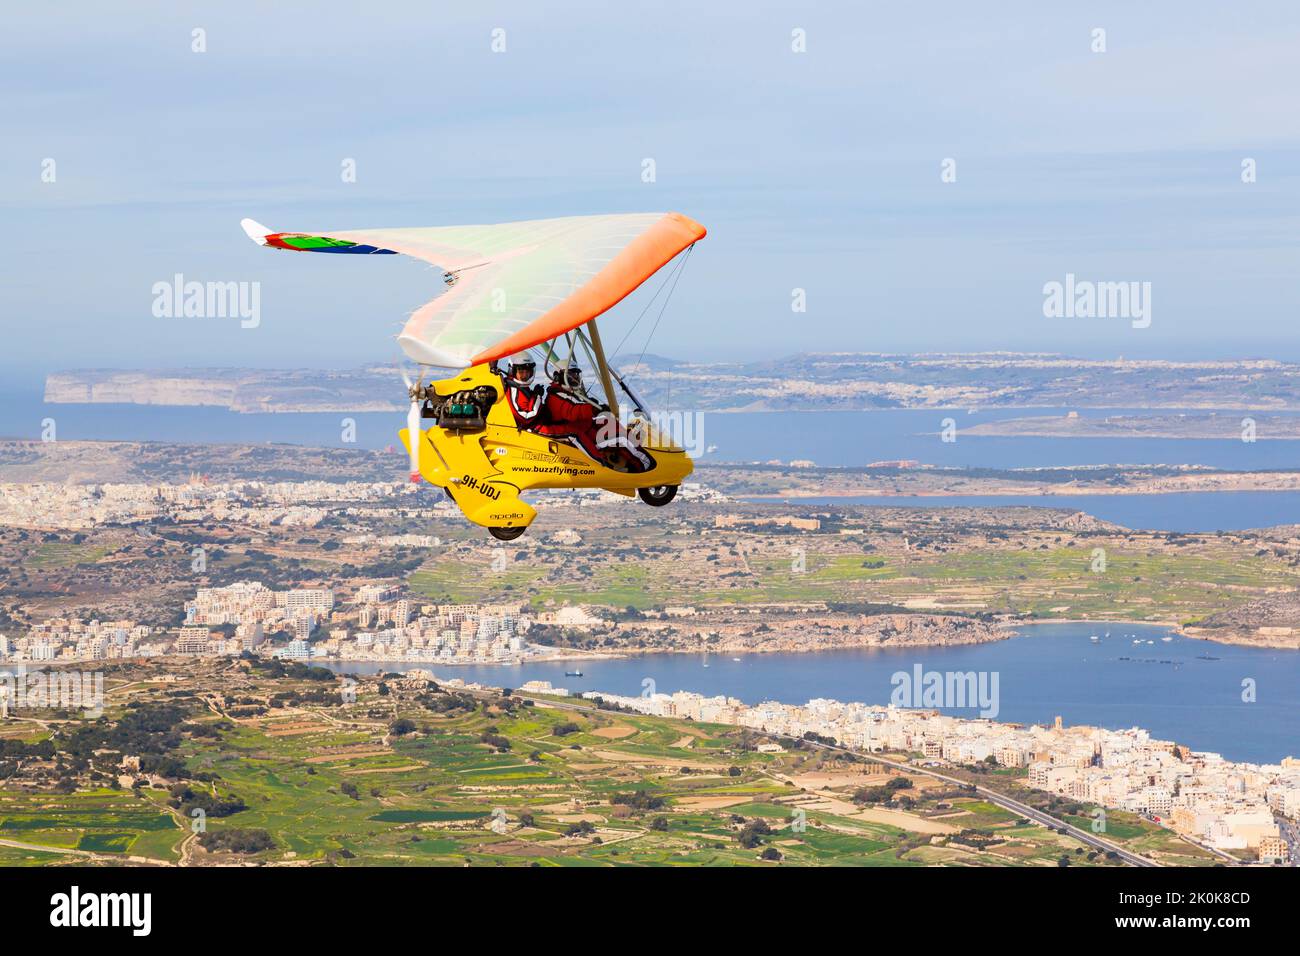 Apollo DeltaJet flexwing microlite flying above Malta with pilot and passenger. Air to air. Stock Photo